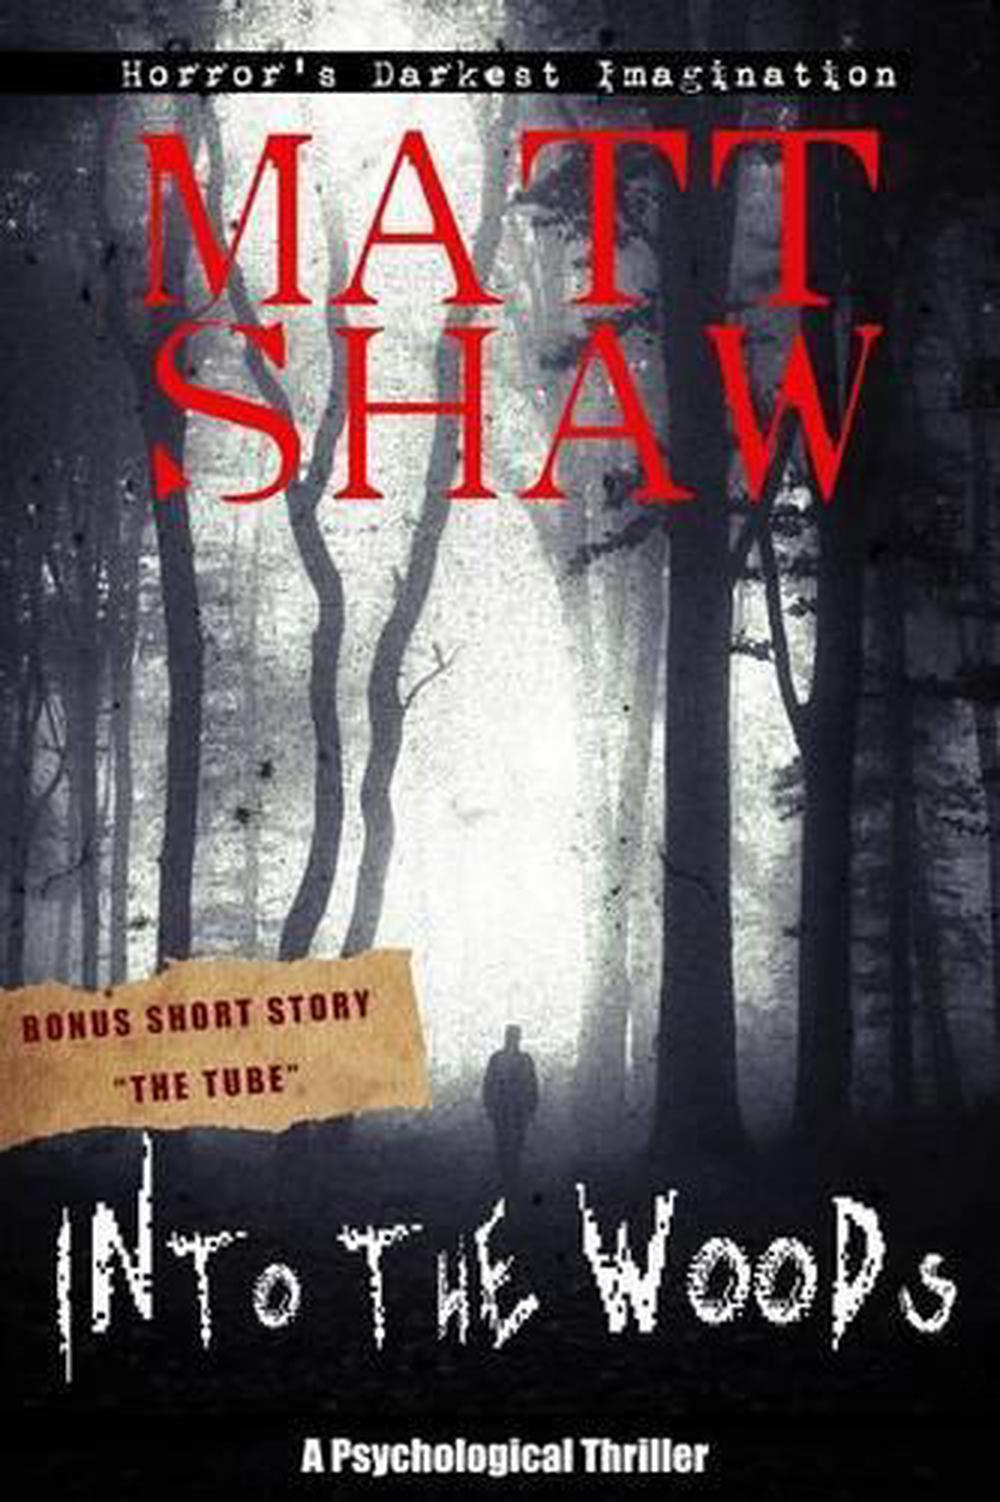 a walk in the woods book review